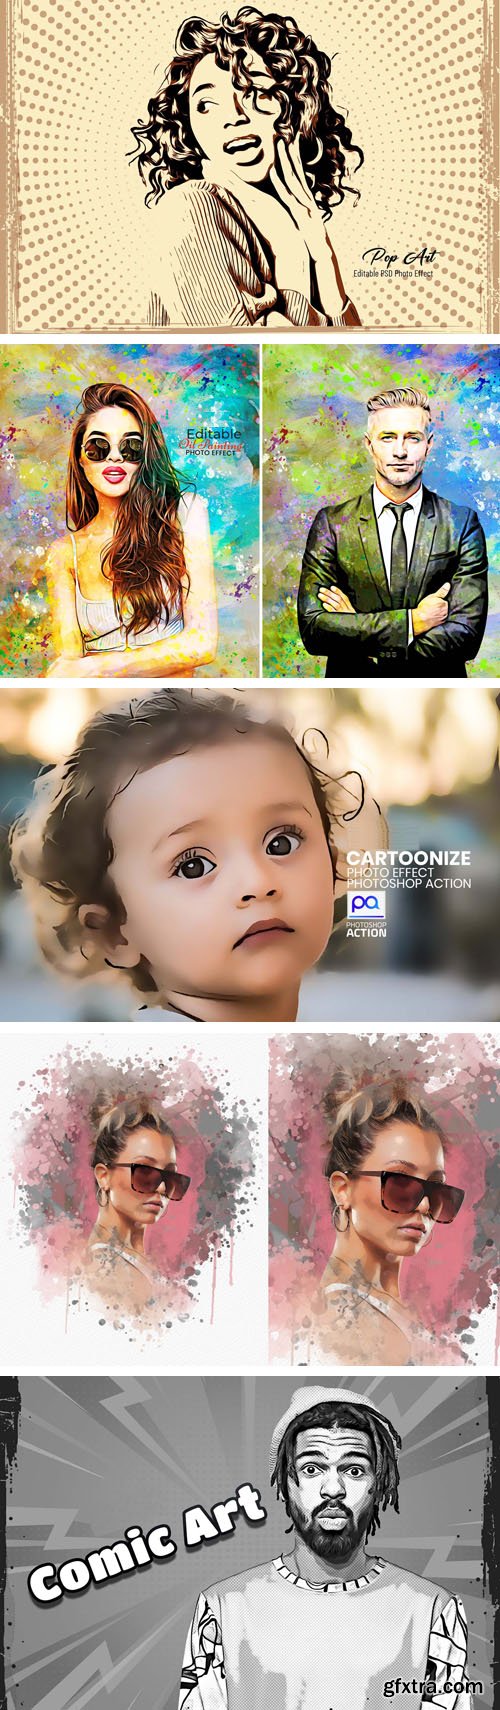 10 Best Photo Effects & Actions for Photoshop [Vol.2]